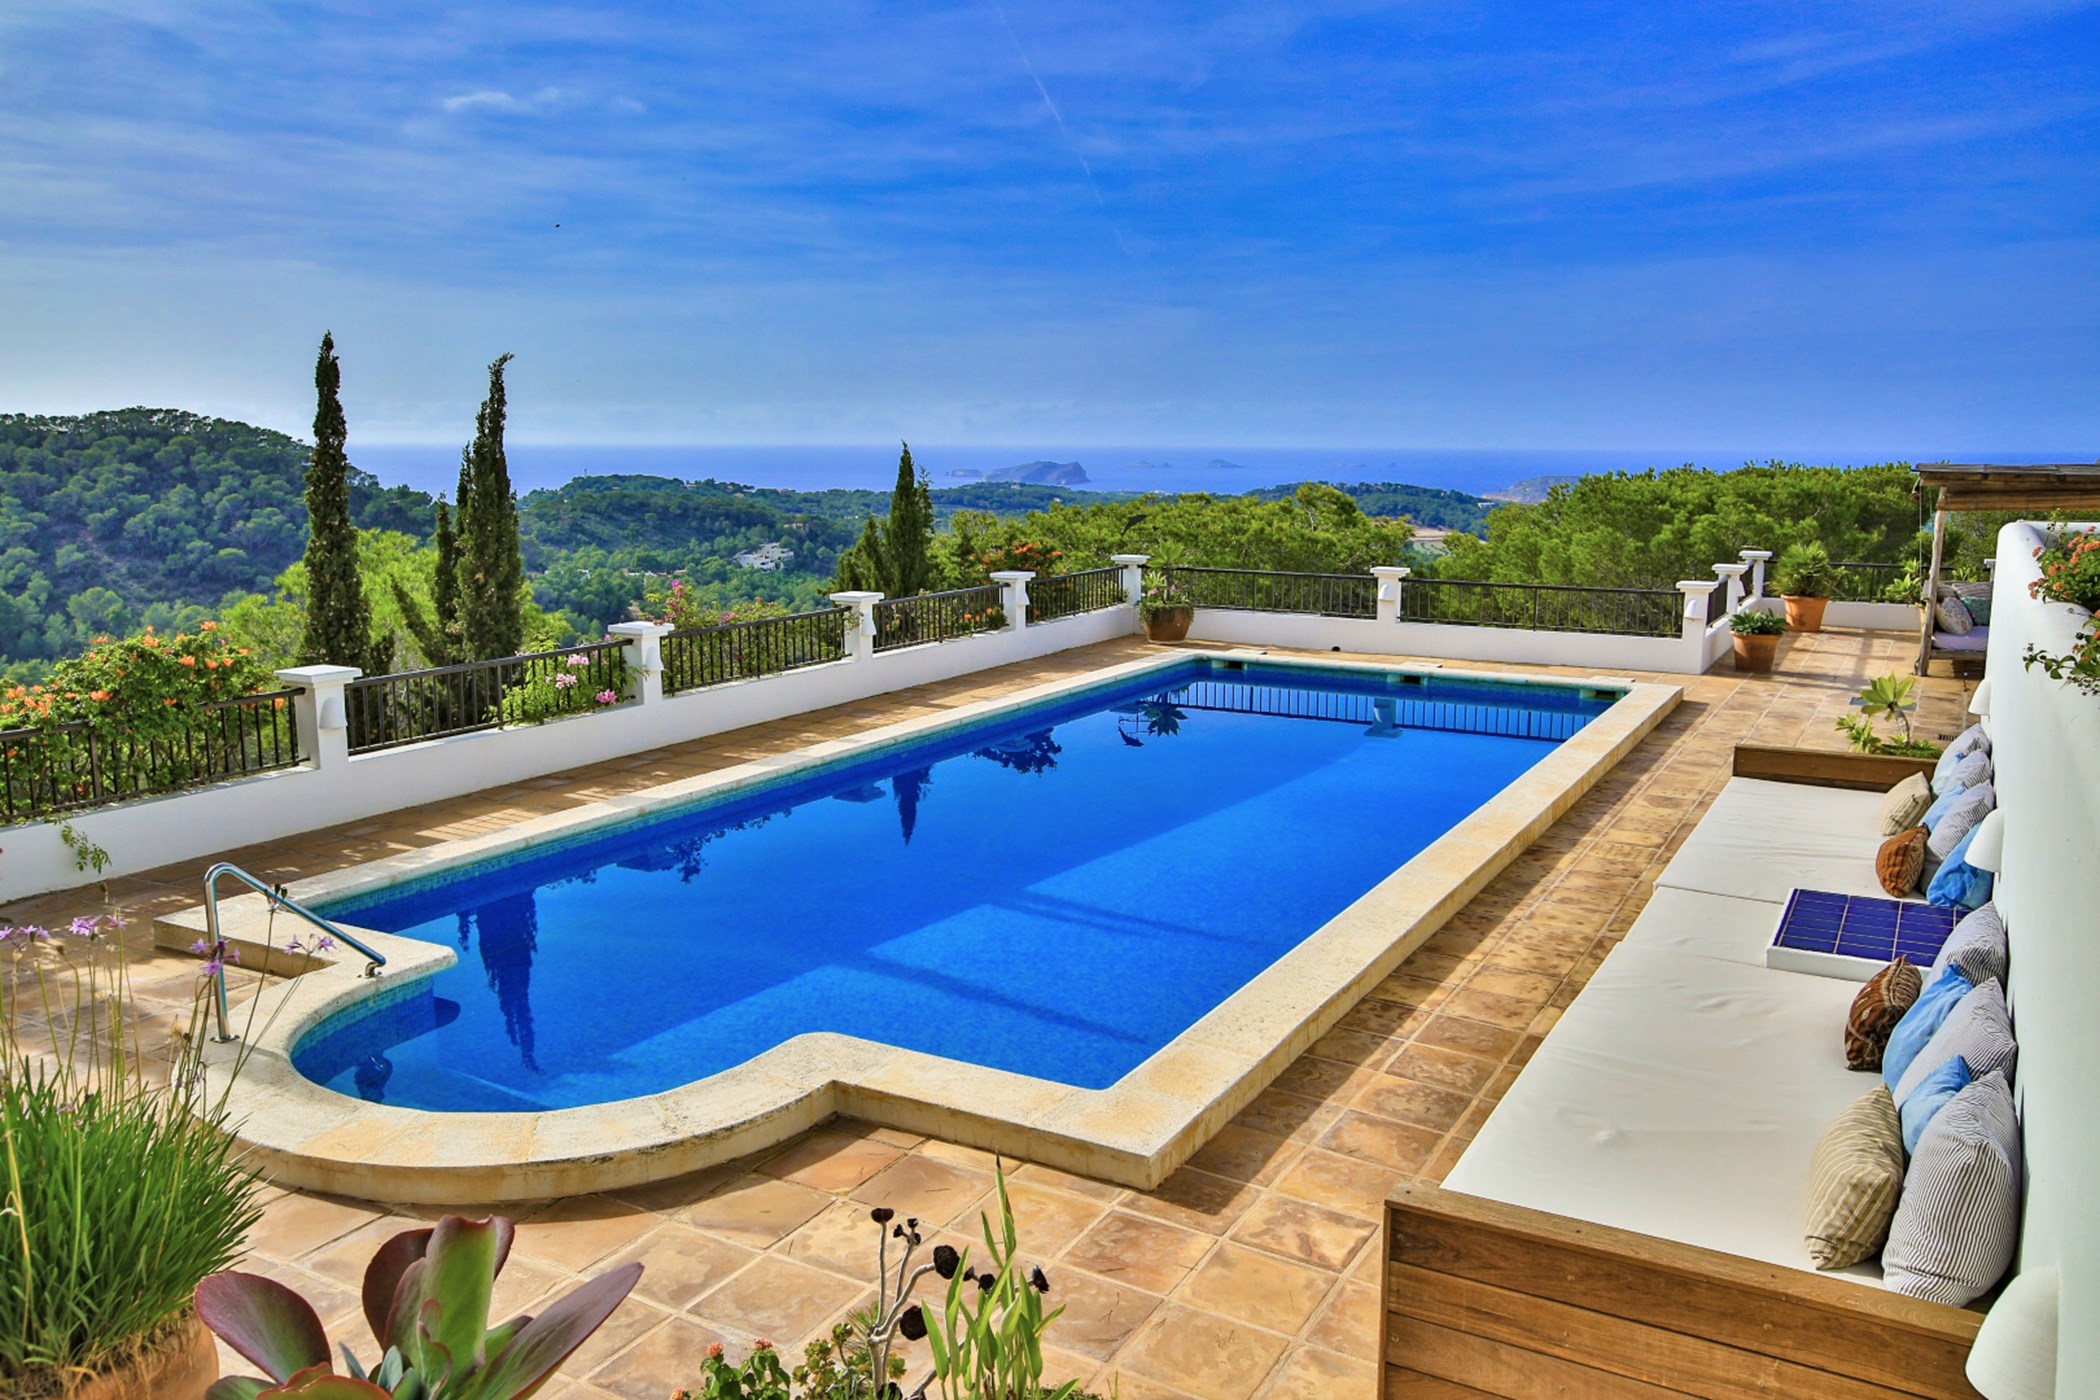 Luxury villa with an breathtaking view overlooking all the beaches and bays